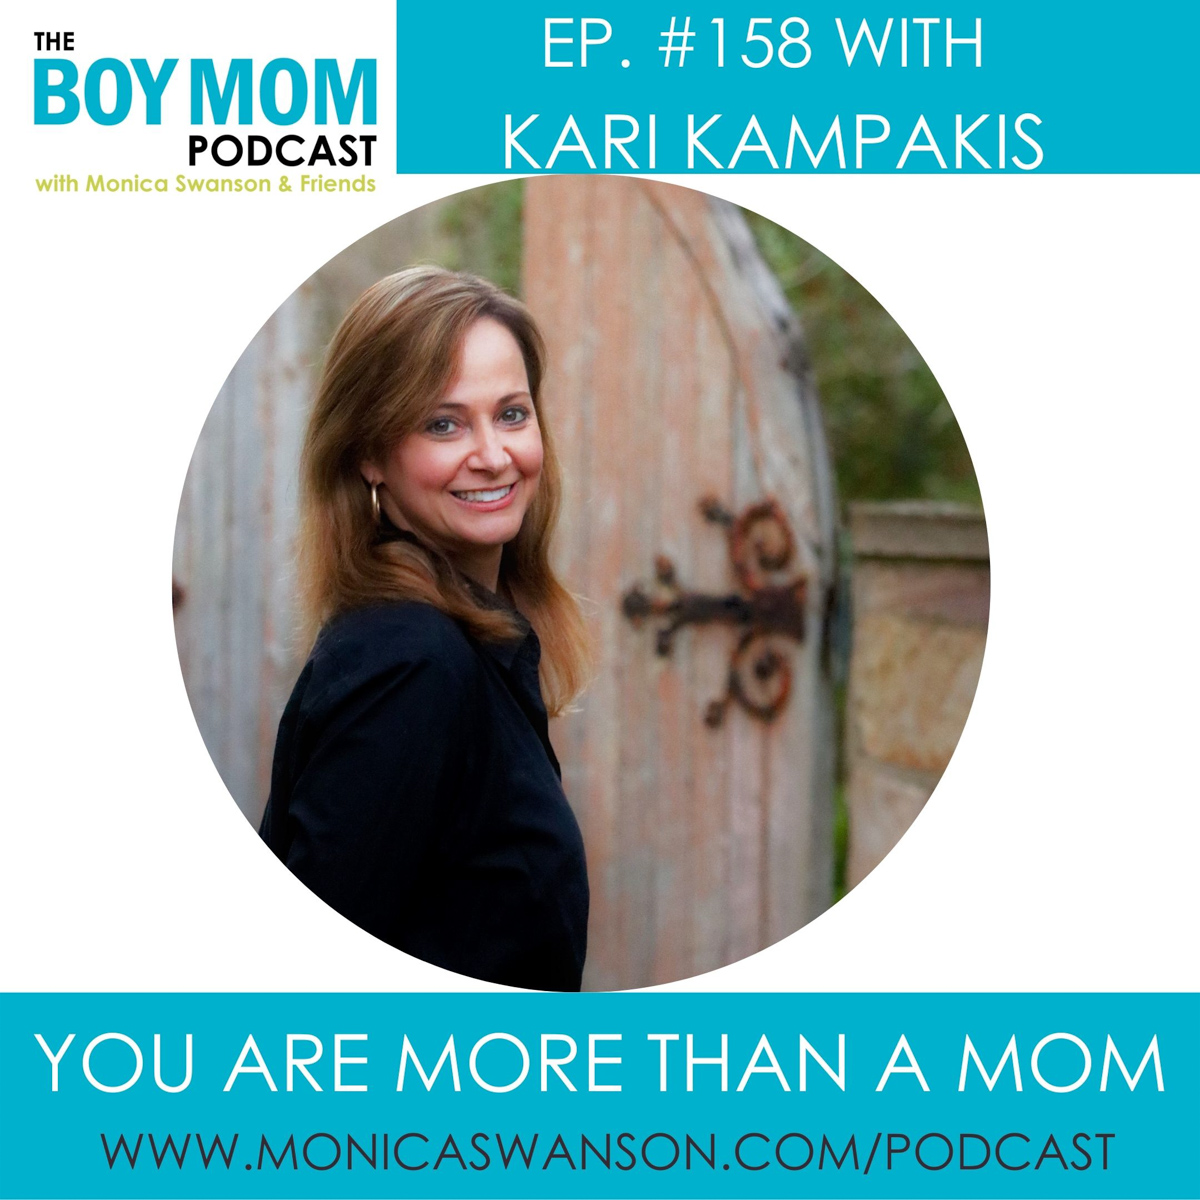 You are More than a Mom {Episode 158 with Kari Kampakis}